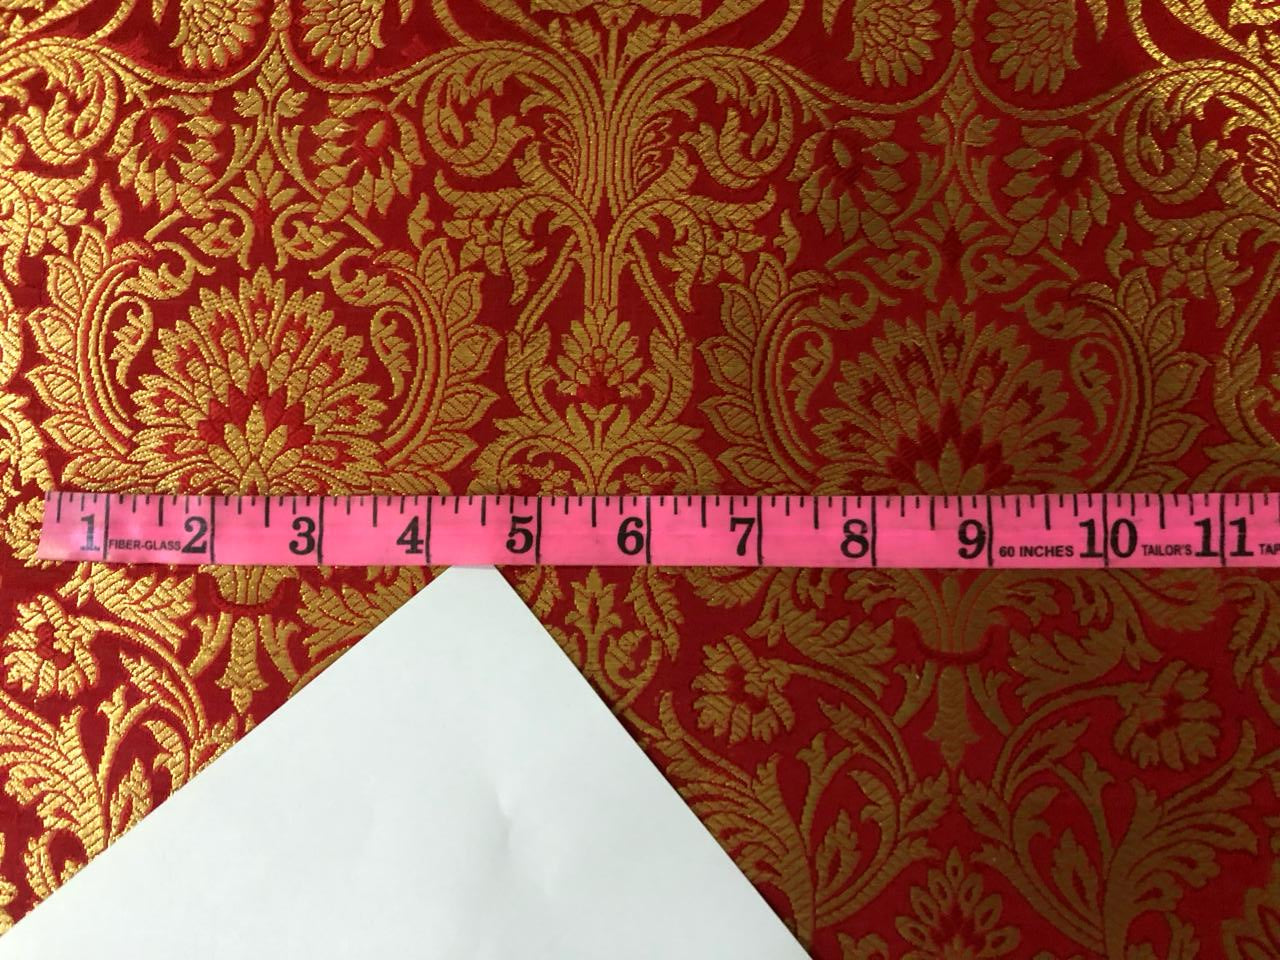 Silk Brocade fabric 44" wide available in Dark red and red Floral Jacquard BRO909[4/5]